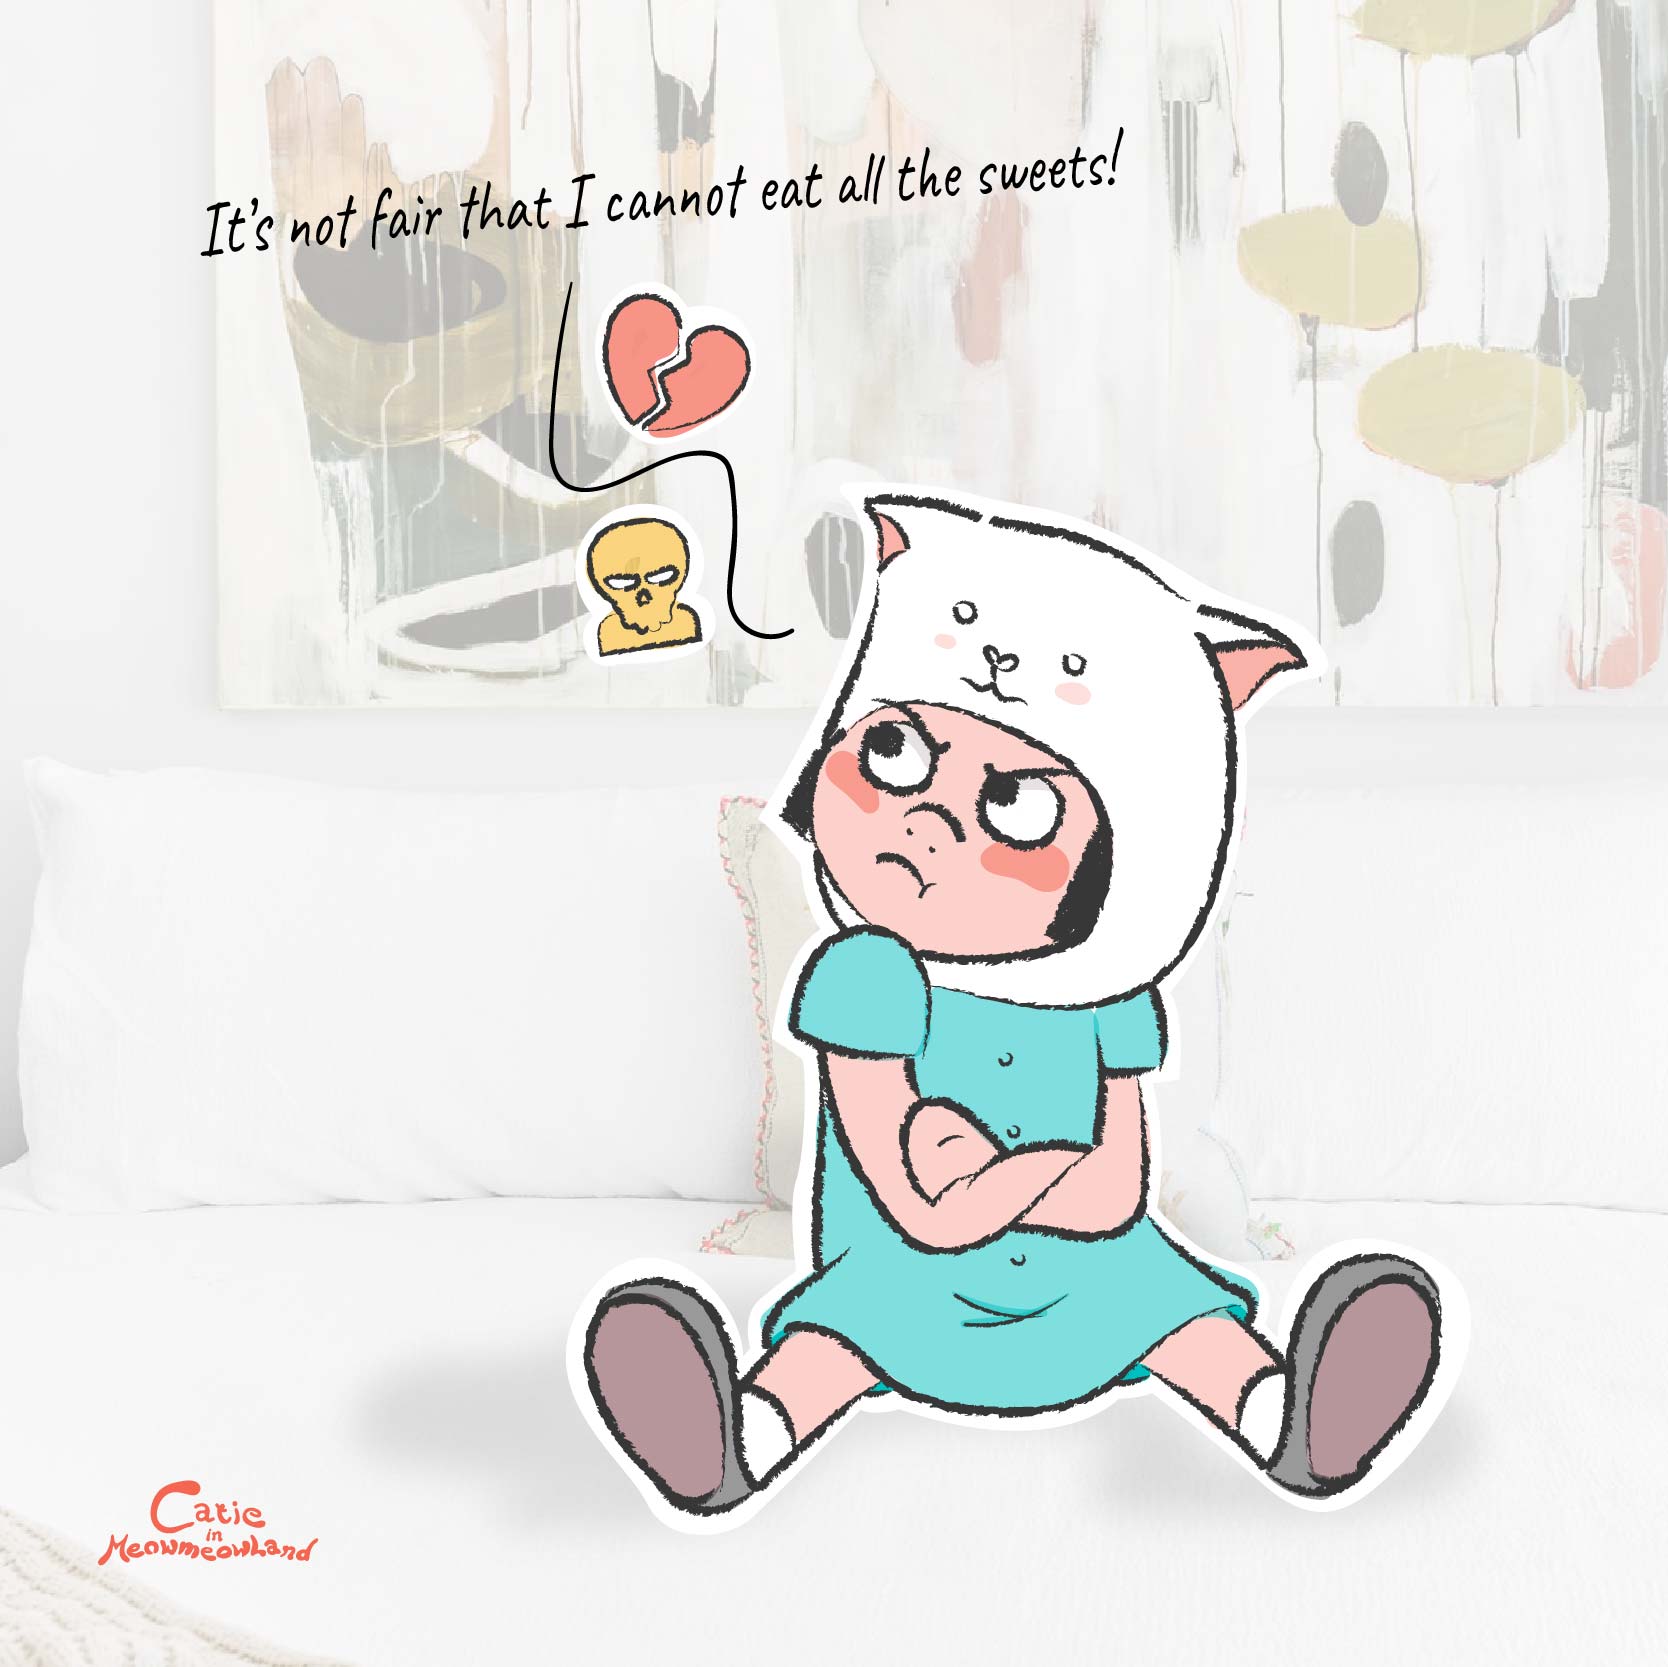 Catie in MeowmeowLand - Doodle illustration - Sweets